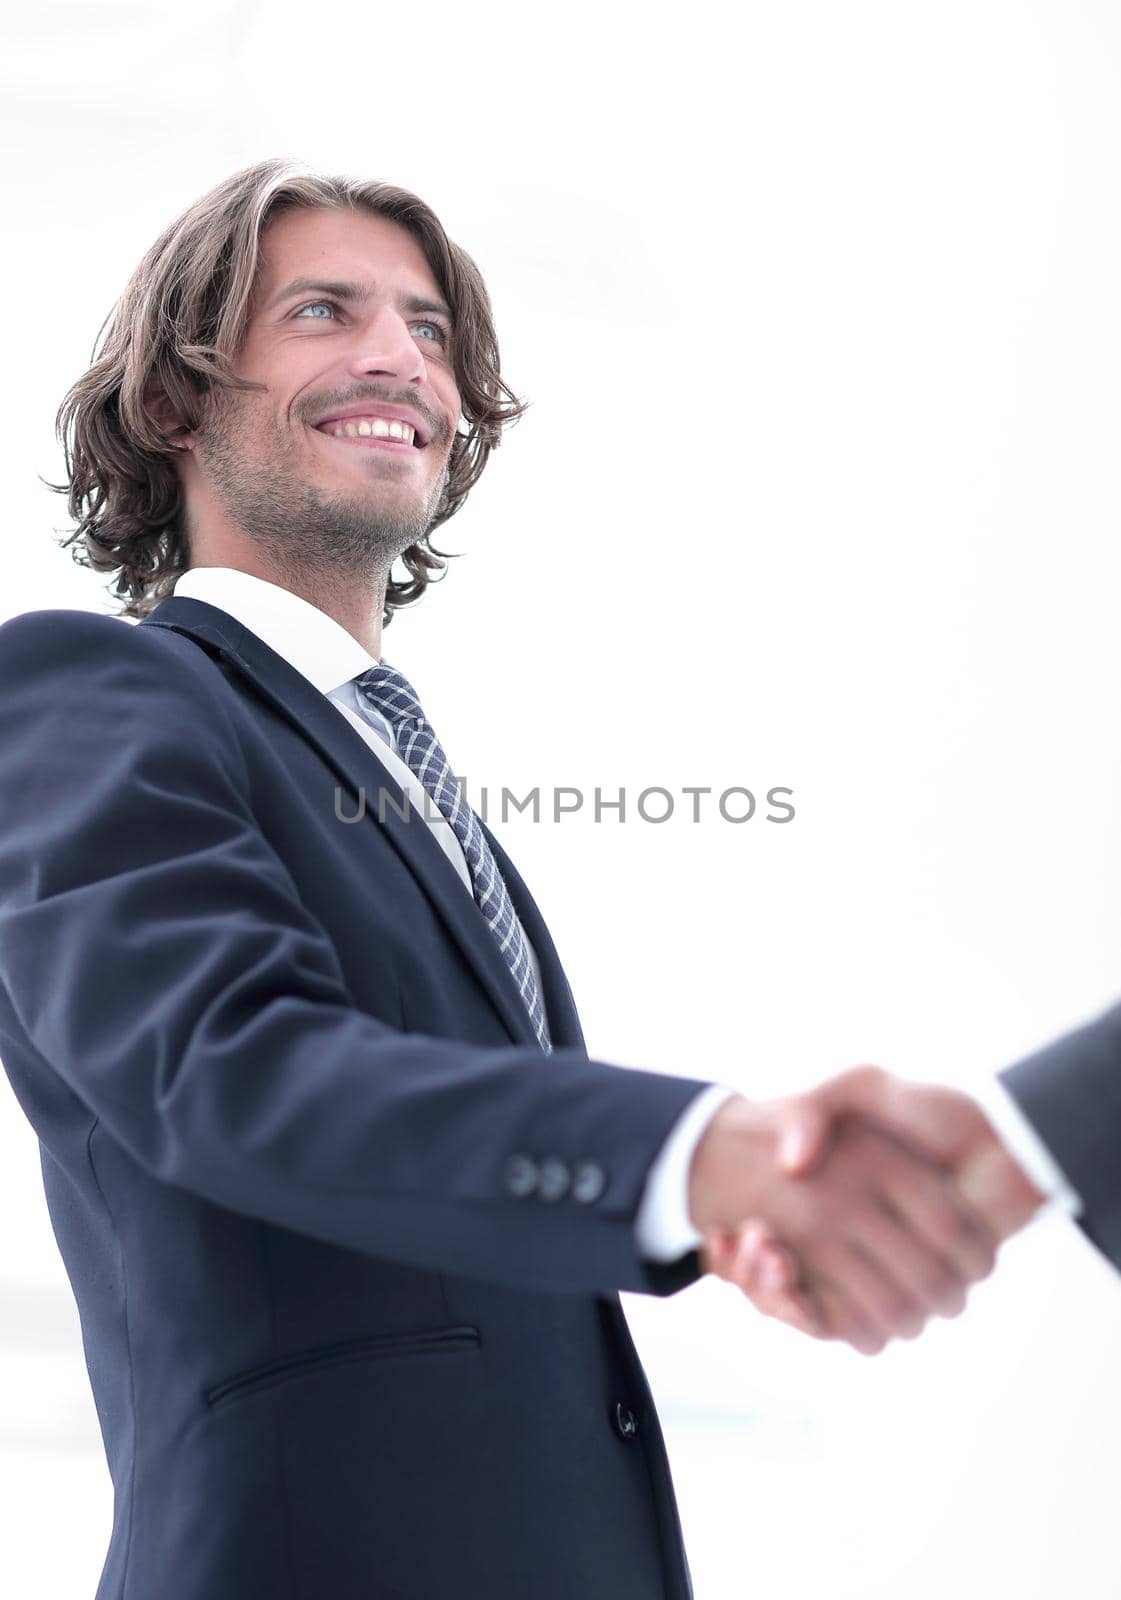 Digital composite of Midsection of business professionals shaking hands